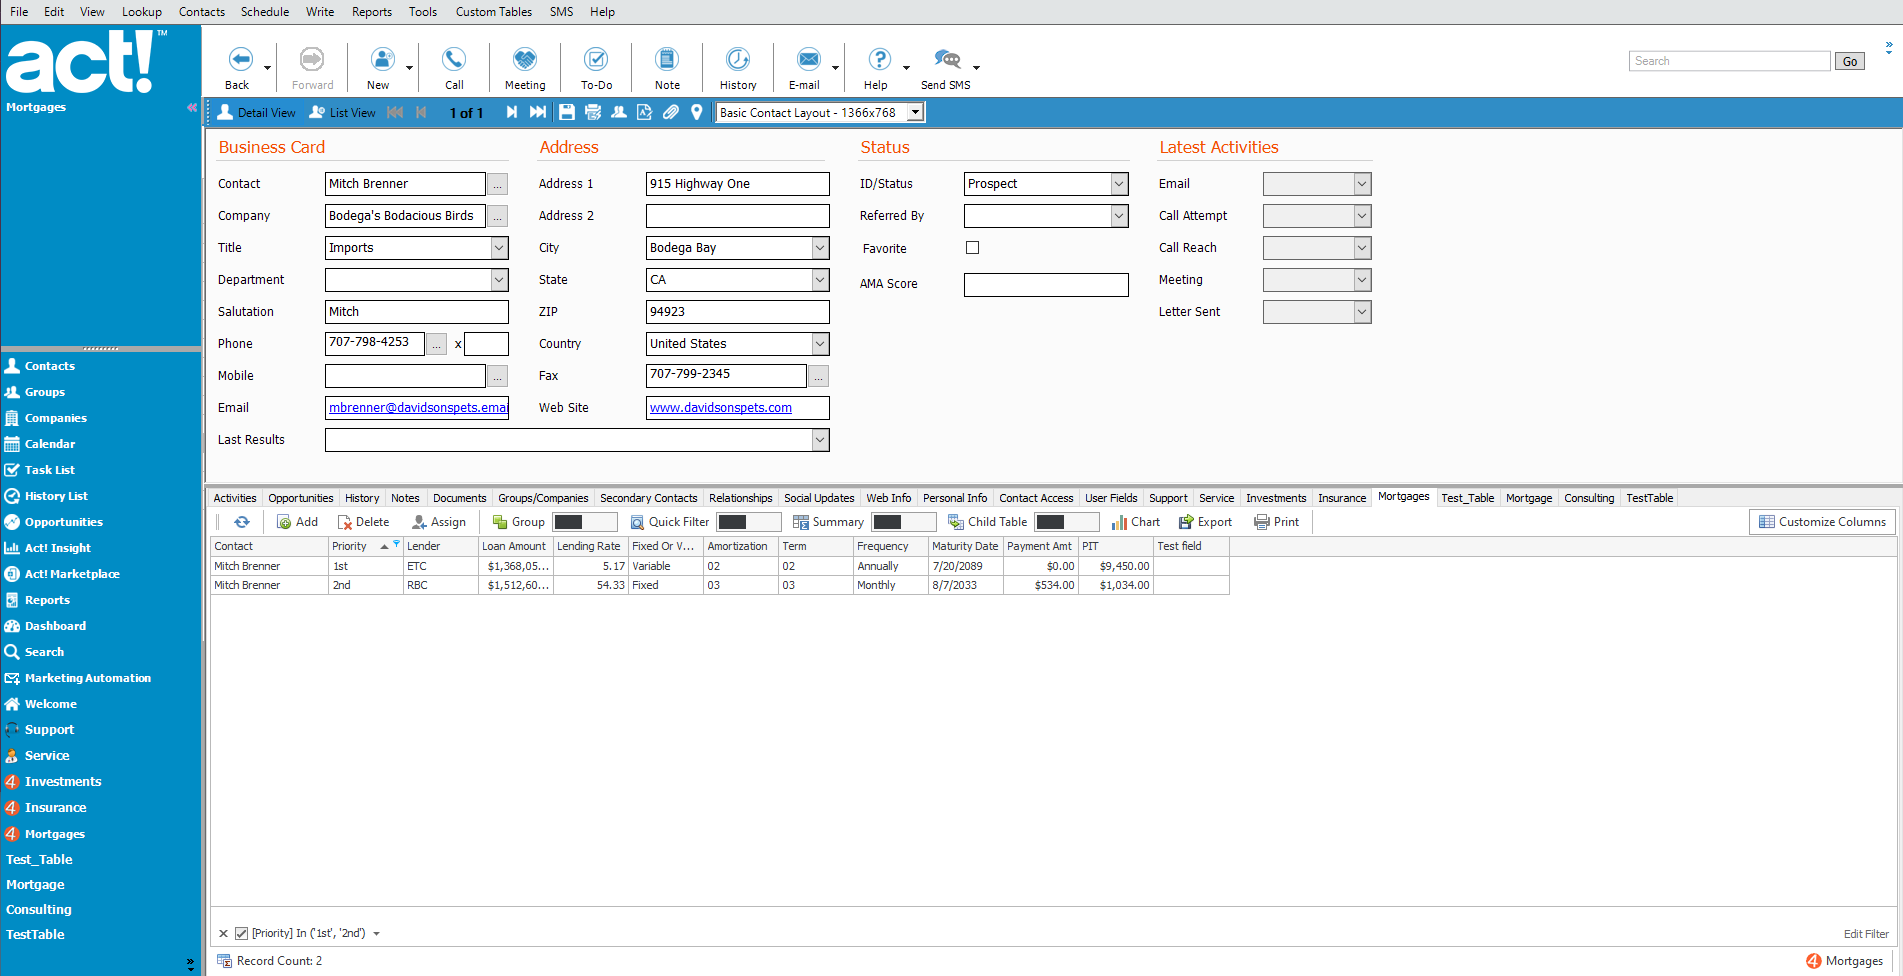 Custom Tables data available within an individual customer contact record